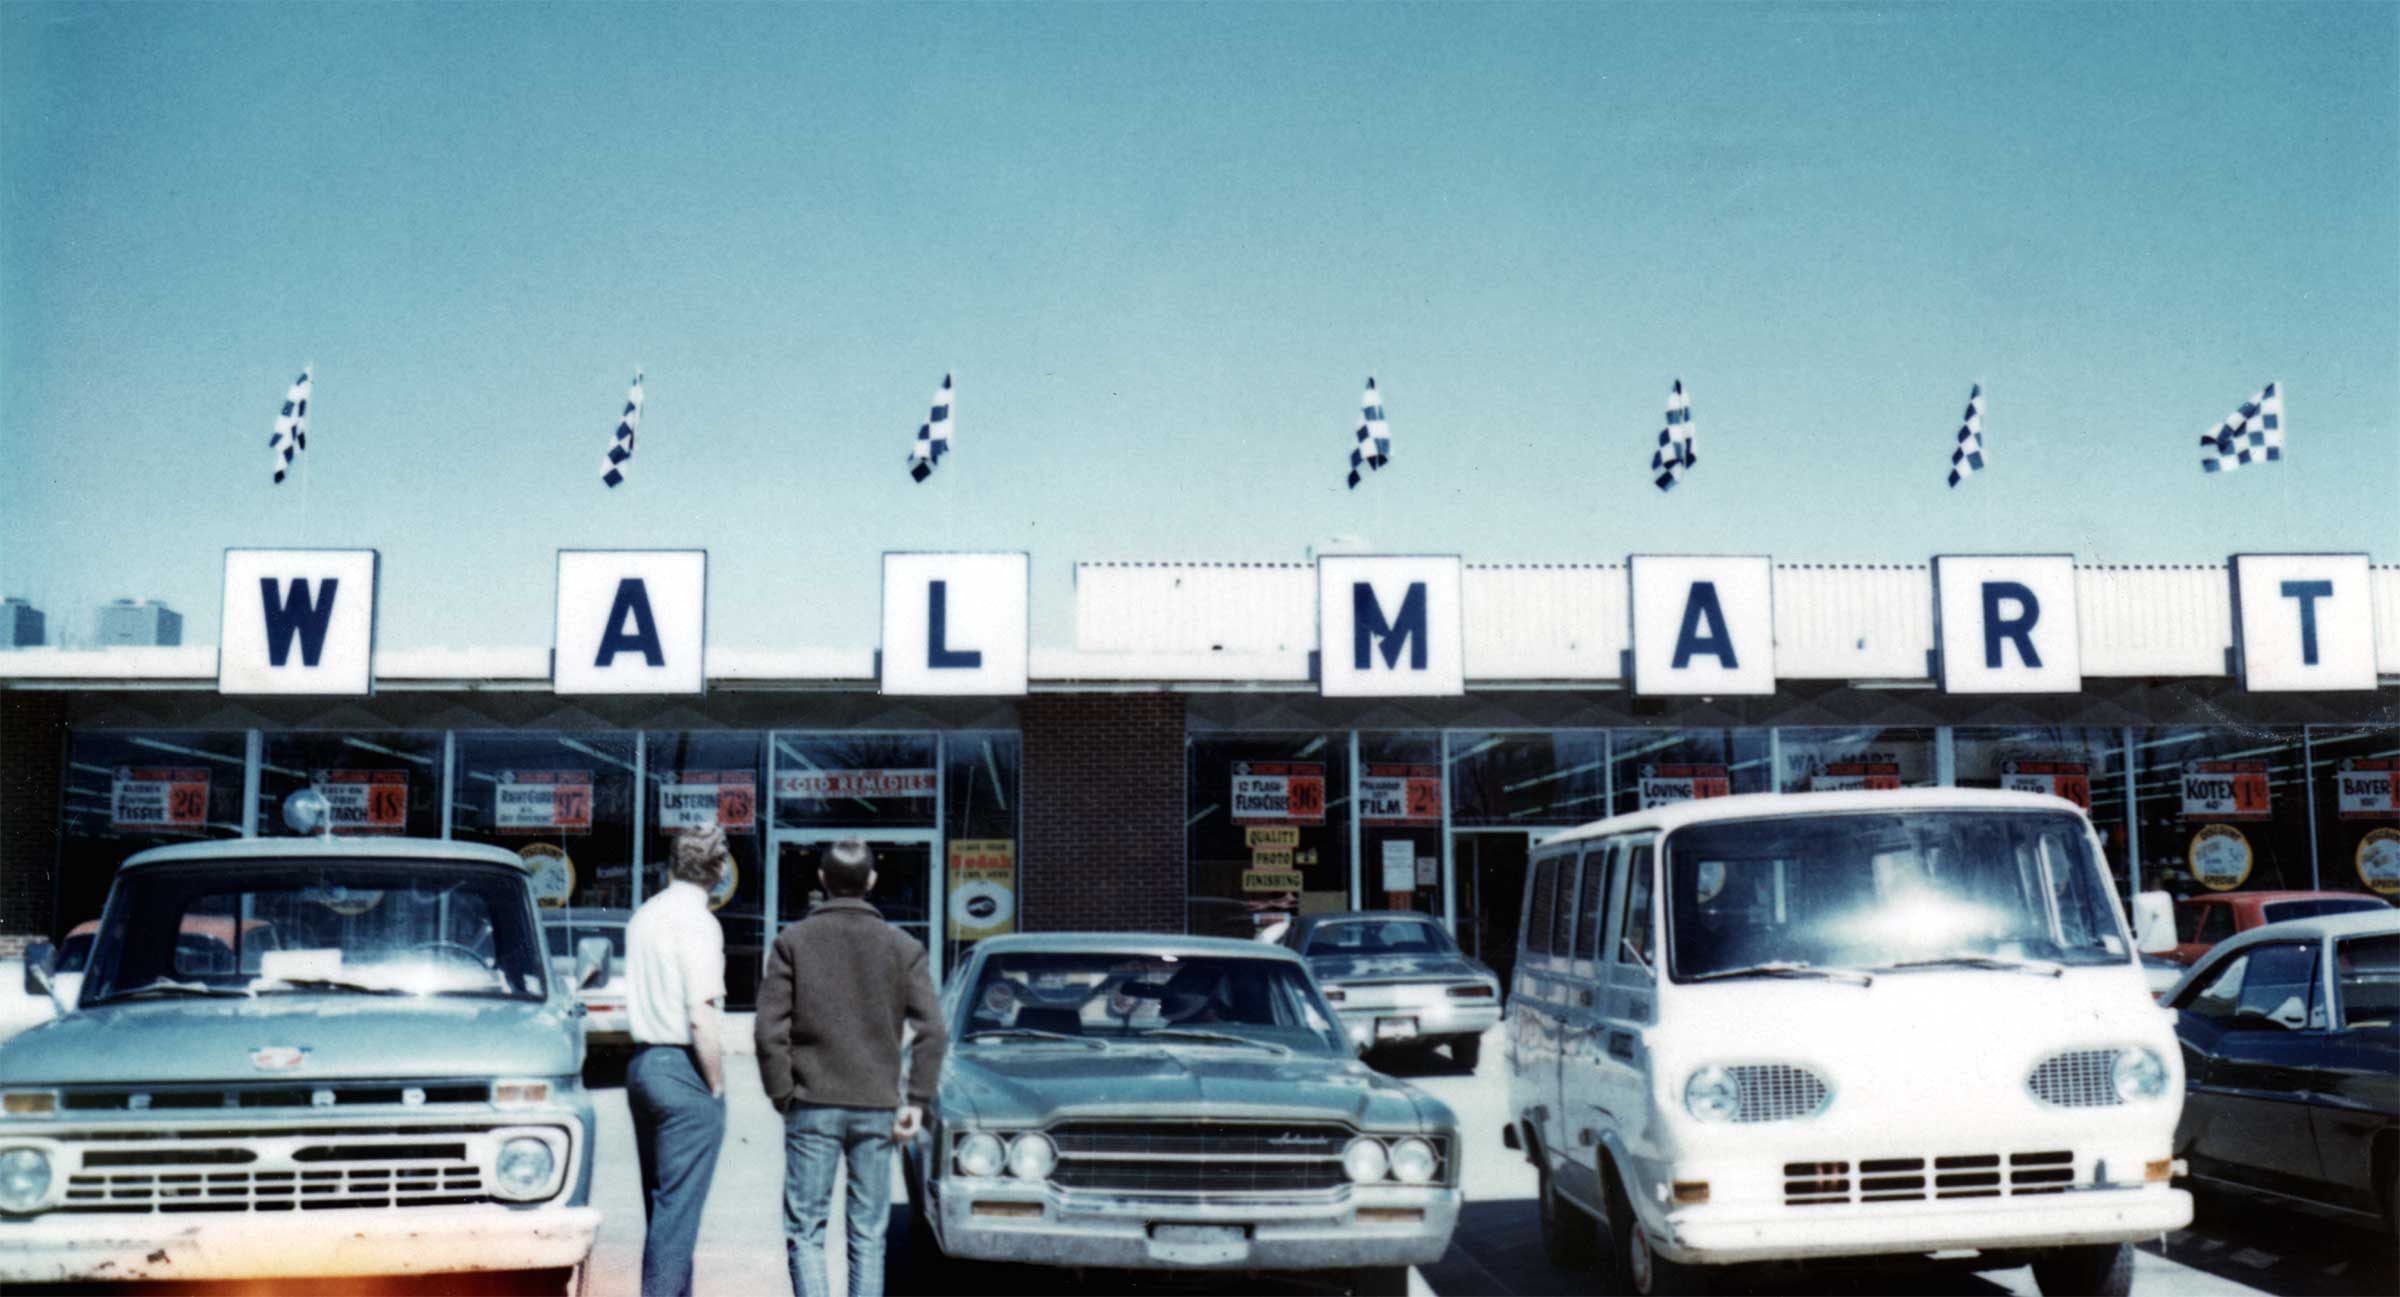 Very Rare 1970s-early 1980s Wal-Mart building. This might possibly